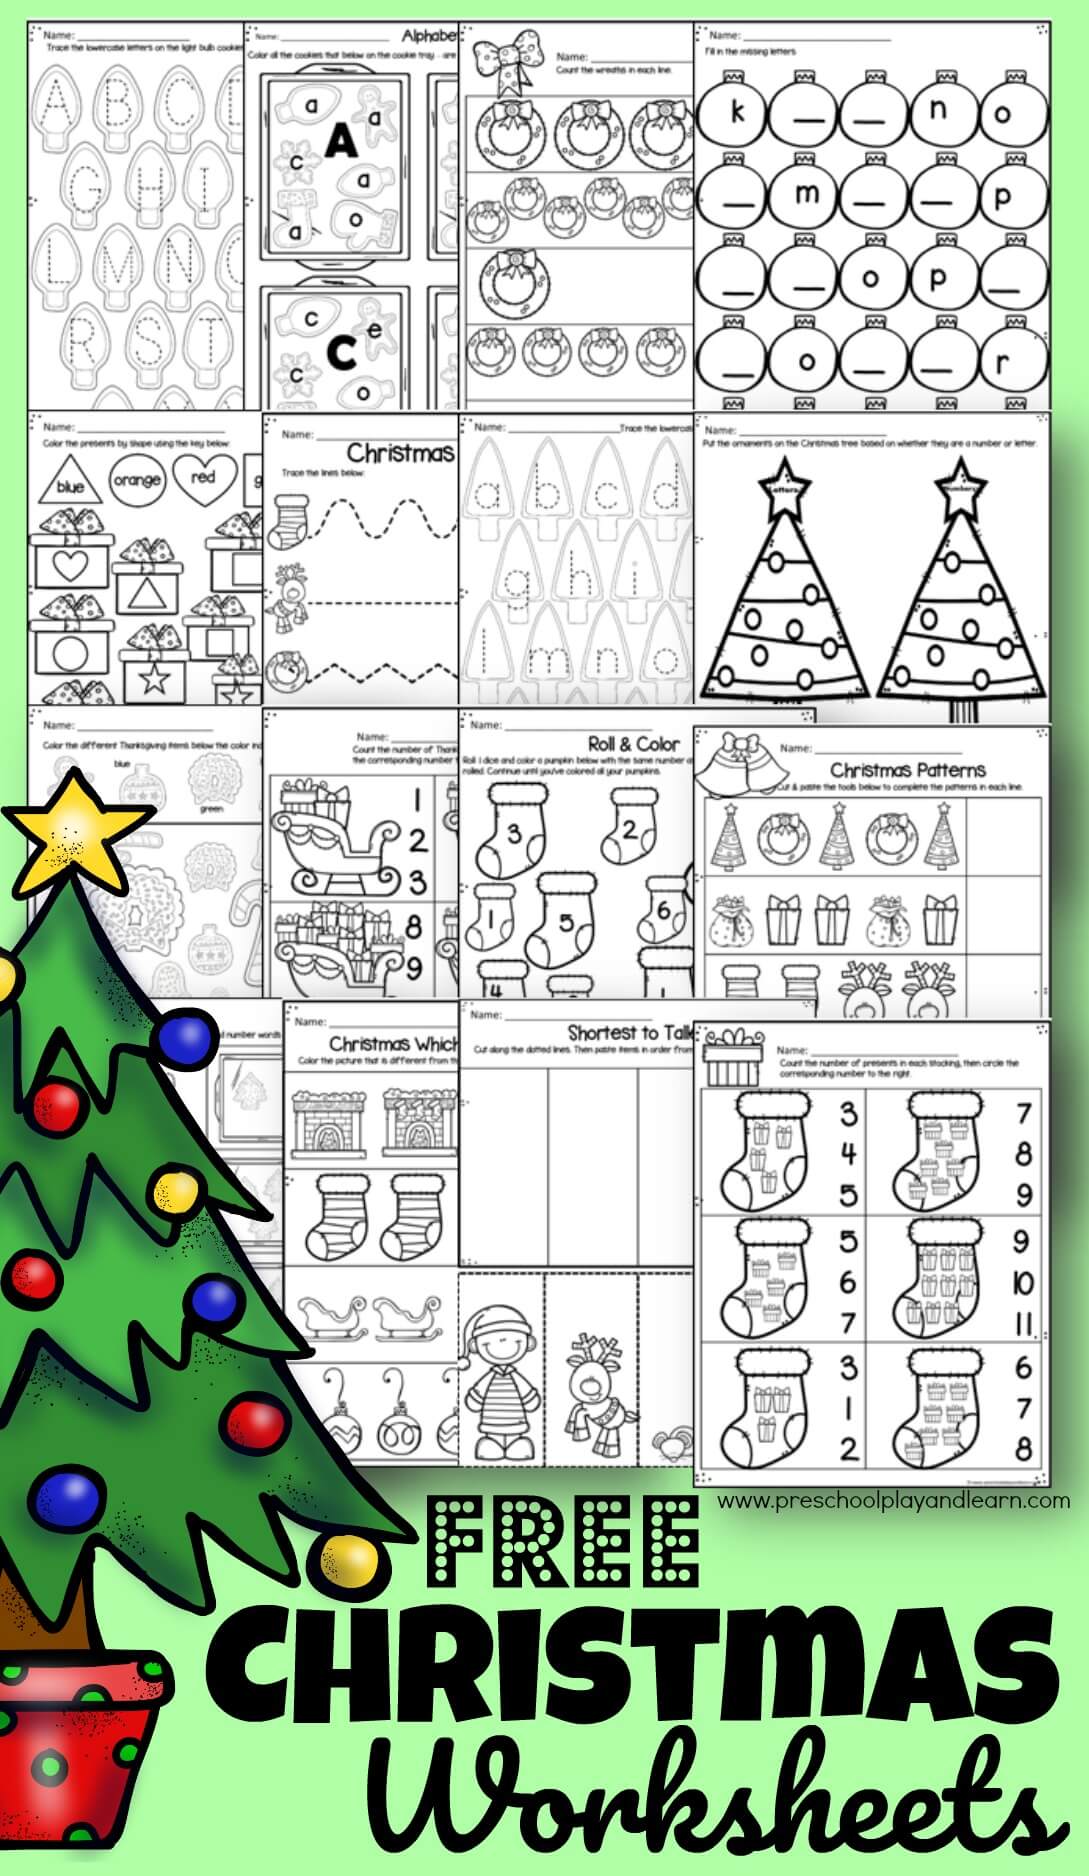 26-listen-von-christmas-worksheets-browse-our-online-library-of